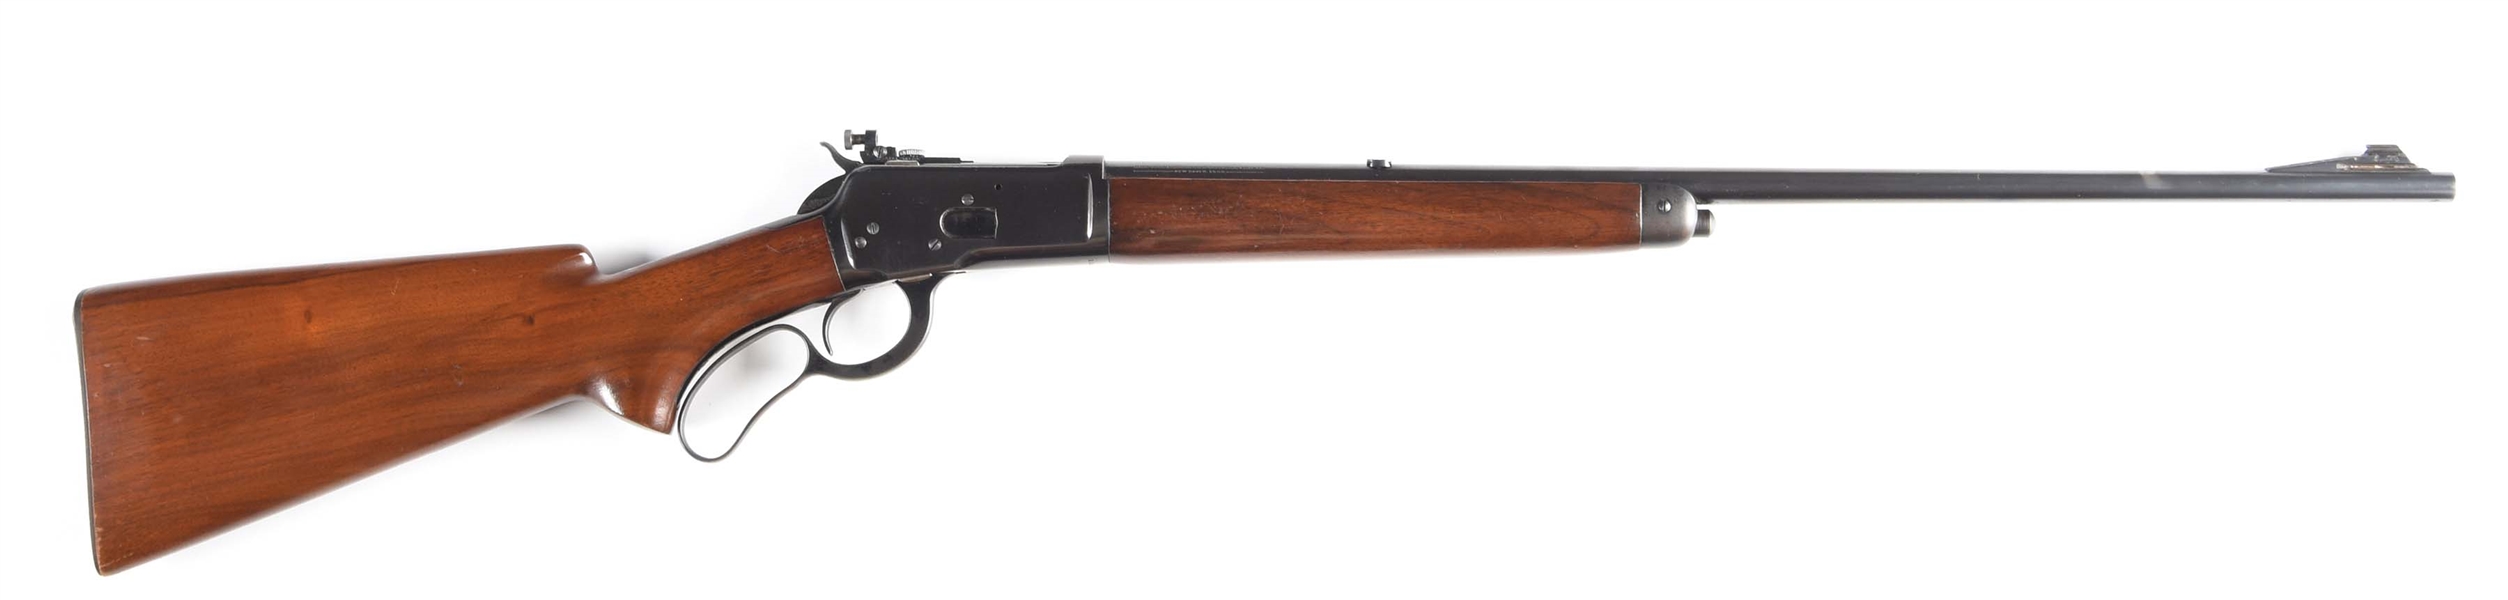 (C) SCARCE .218 BEE WINCHESTER MODEL 65 LEVER ACTION RIFLE (1938).